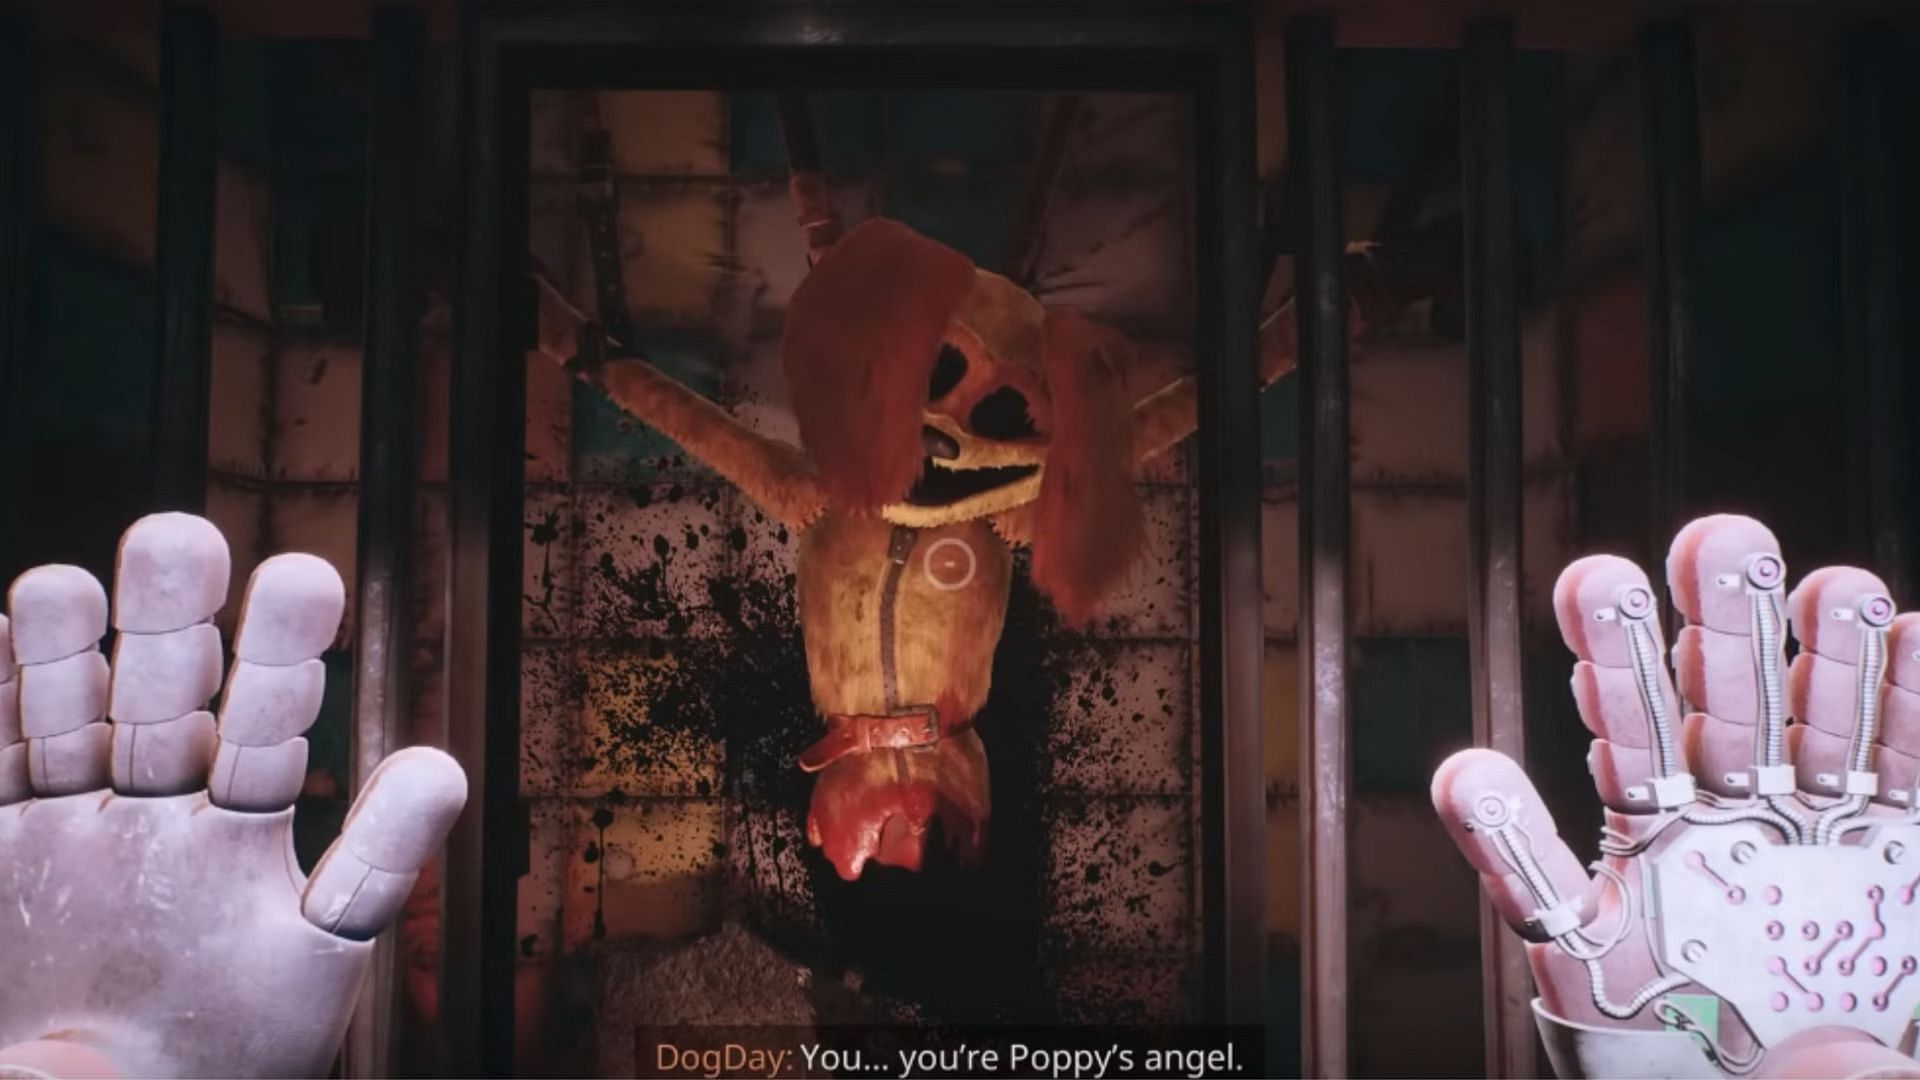 Poppy Playtime Chapter 3 ending raises questions (Image via YouTube/SHOTLY SCARY)